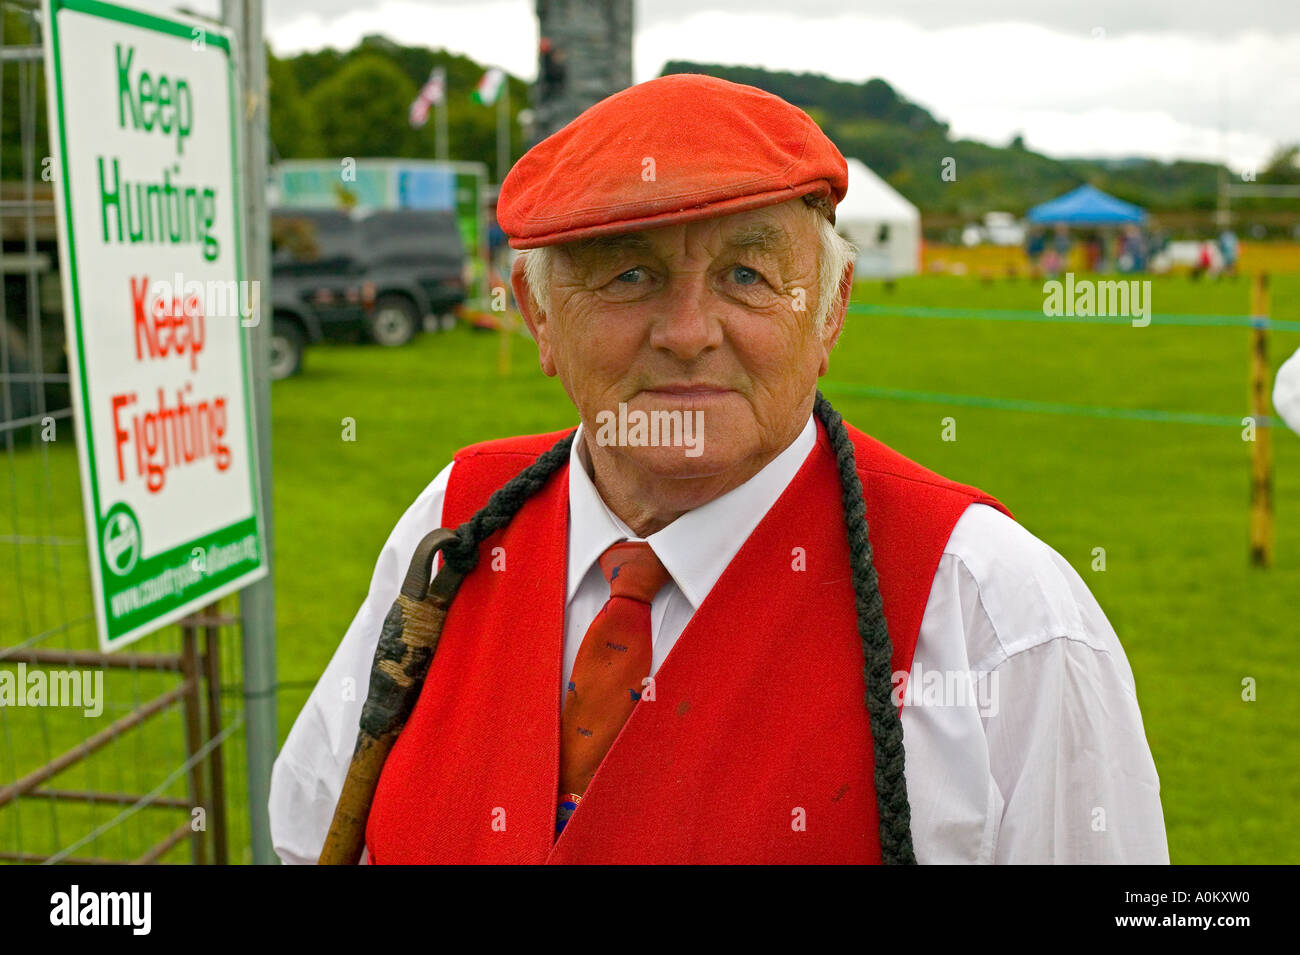 Huntsman at Brecon Agricultural  show. front view Stock Photo